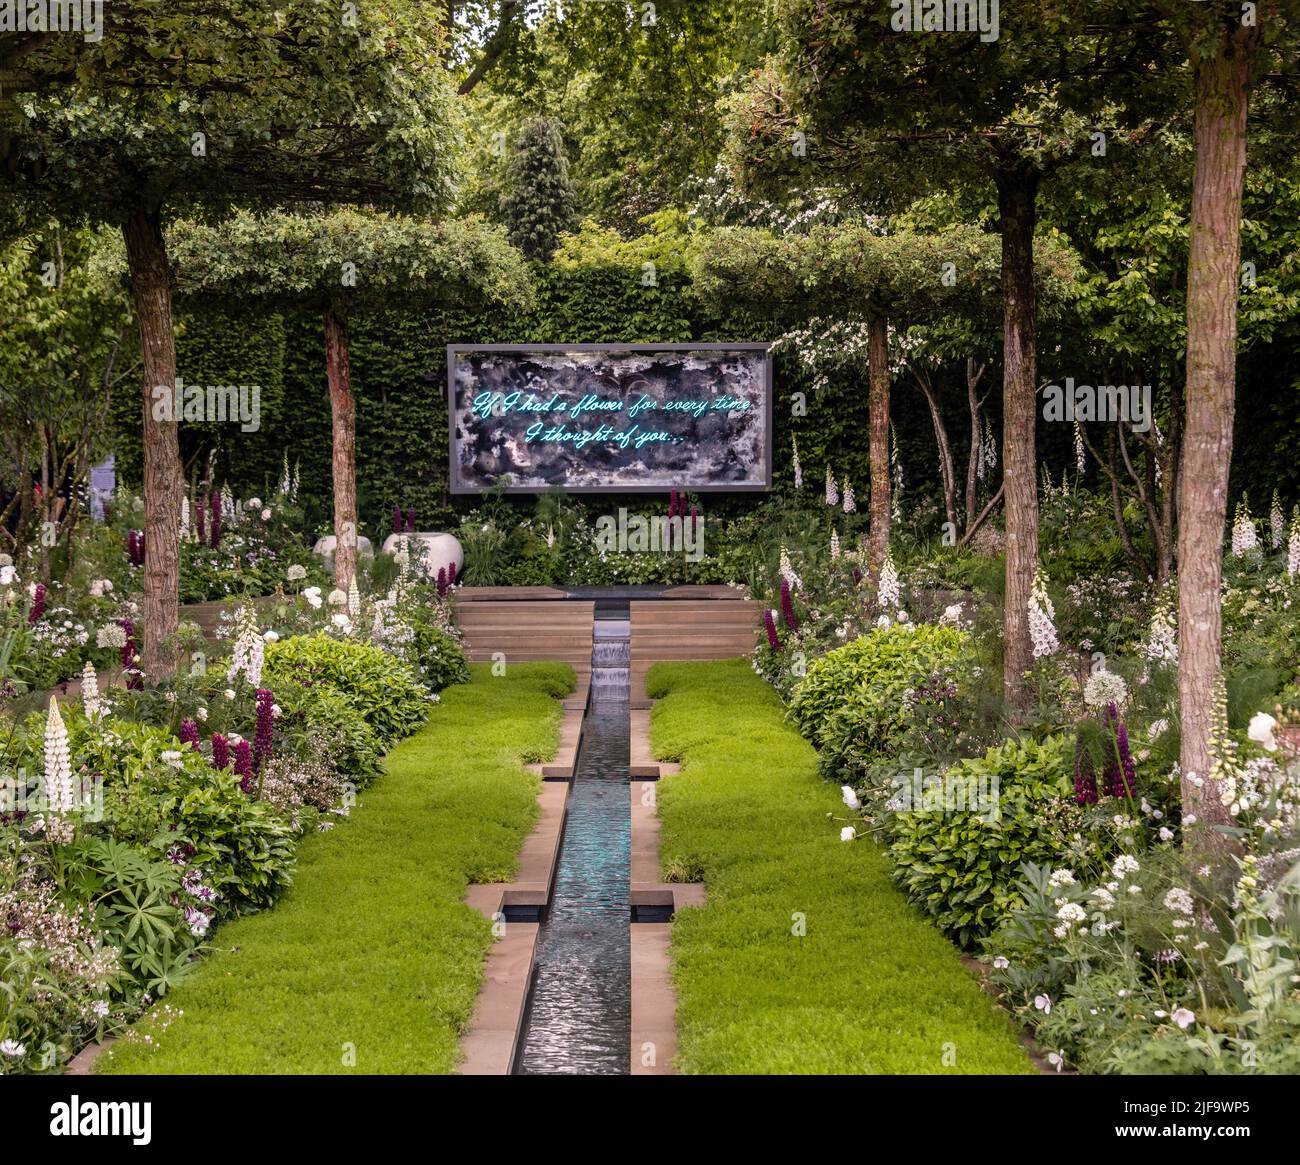 The Perennial Garden 'With Love' at the Chelsea Flower Show, London.  Designed by Richard Miers. Stock Photo